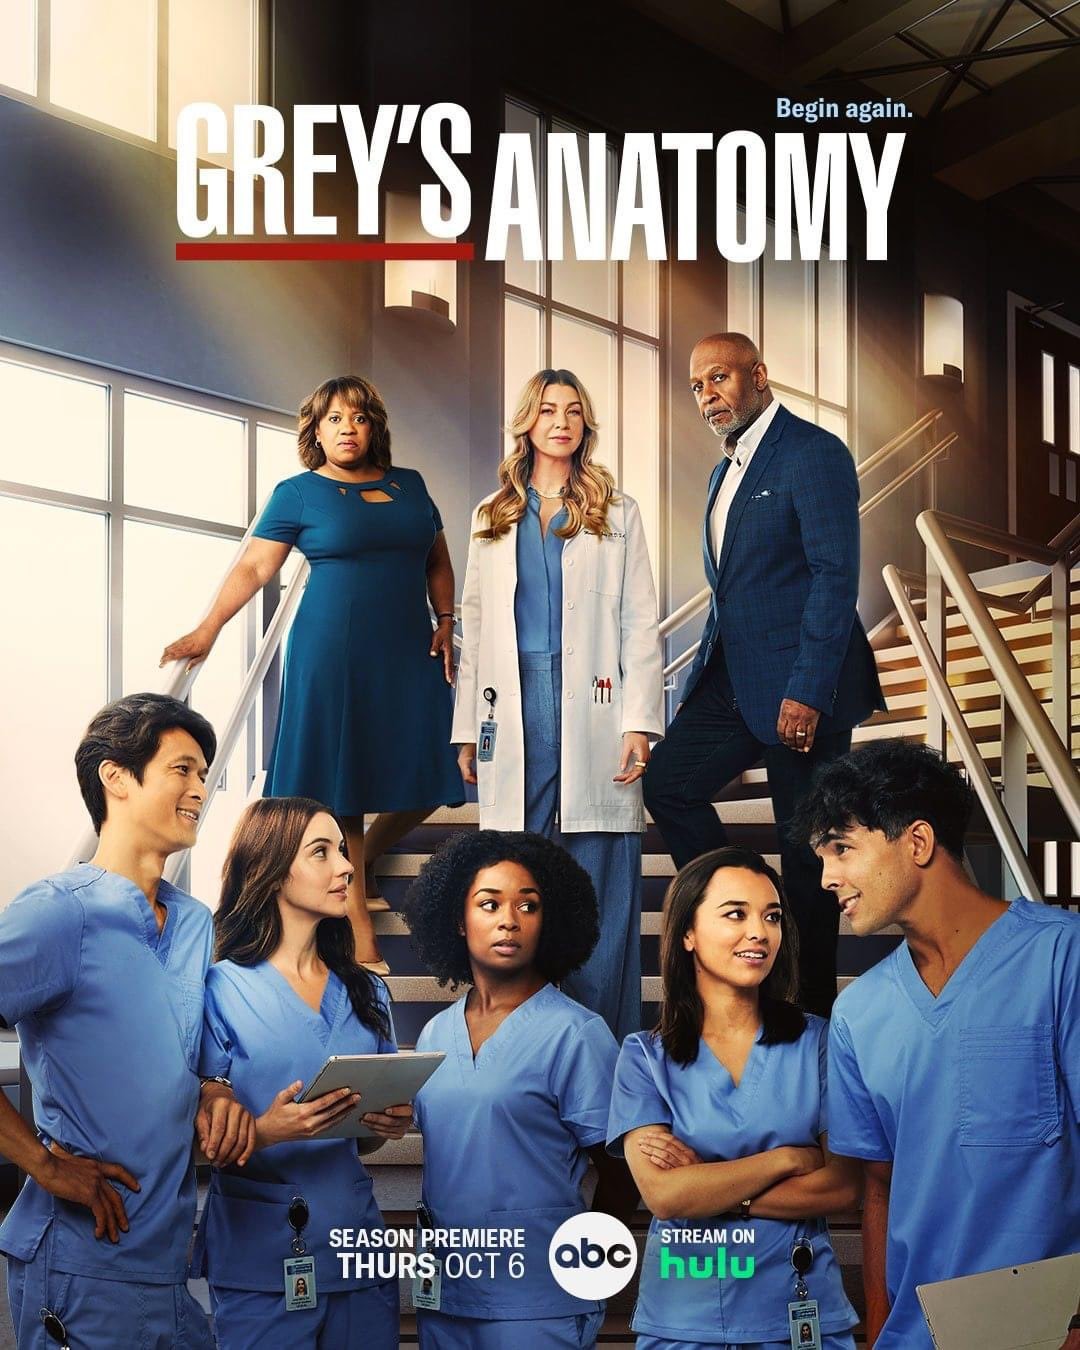 Extra Large TV Poster Image for Grey's Anatomy (#27 of 29)